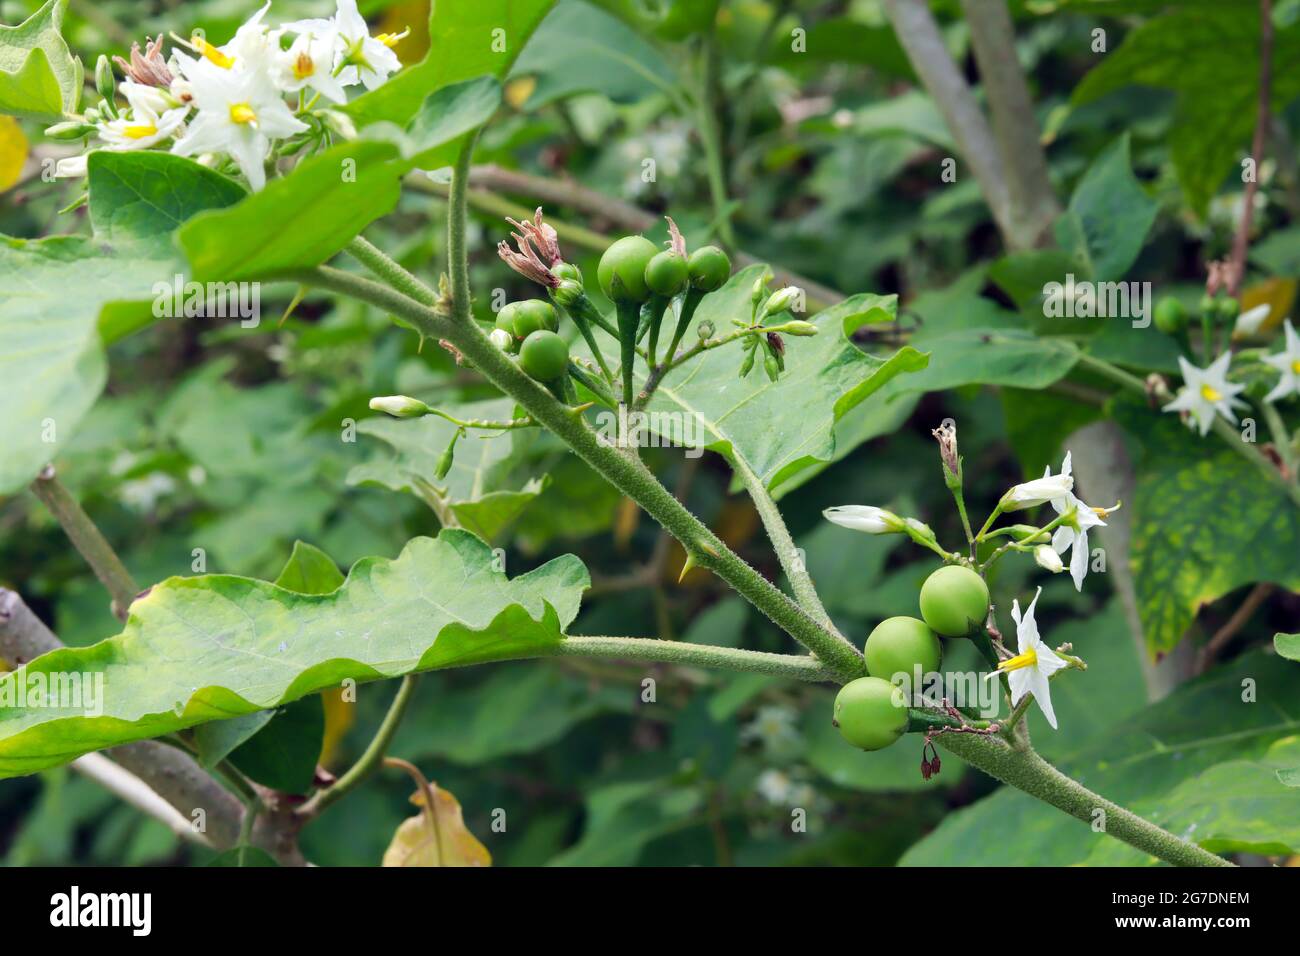 pea eggplant and flowers on the tree in the farm, blurry green leaves background. Stock Photo